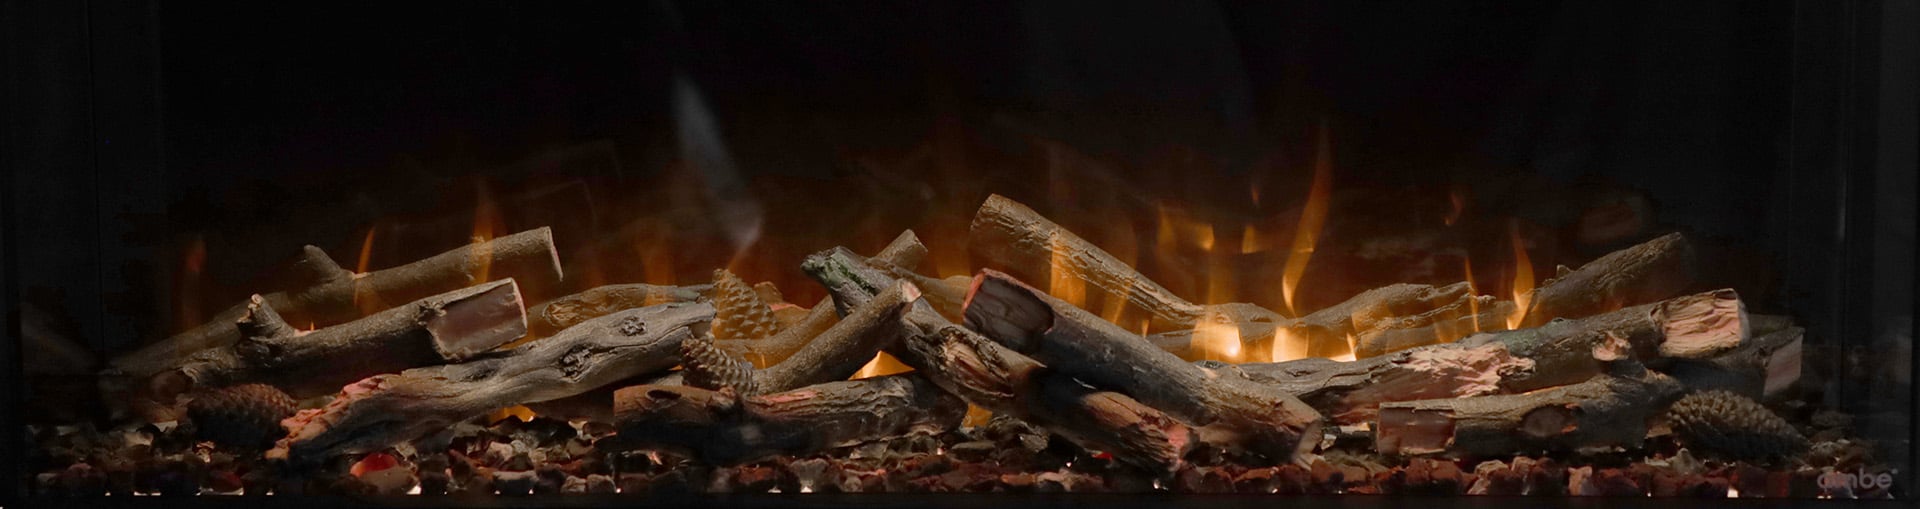 Classic Logs and Embers